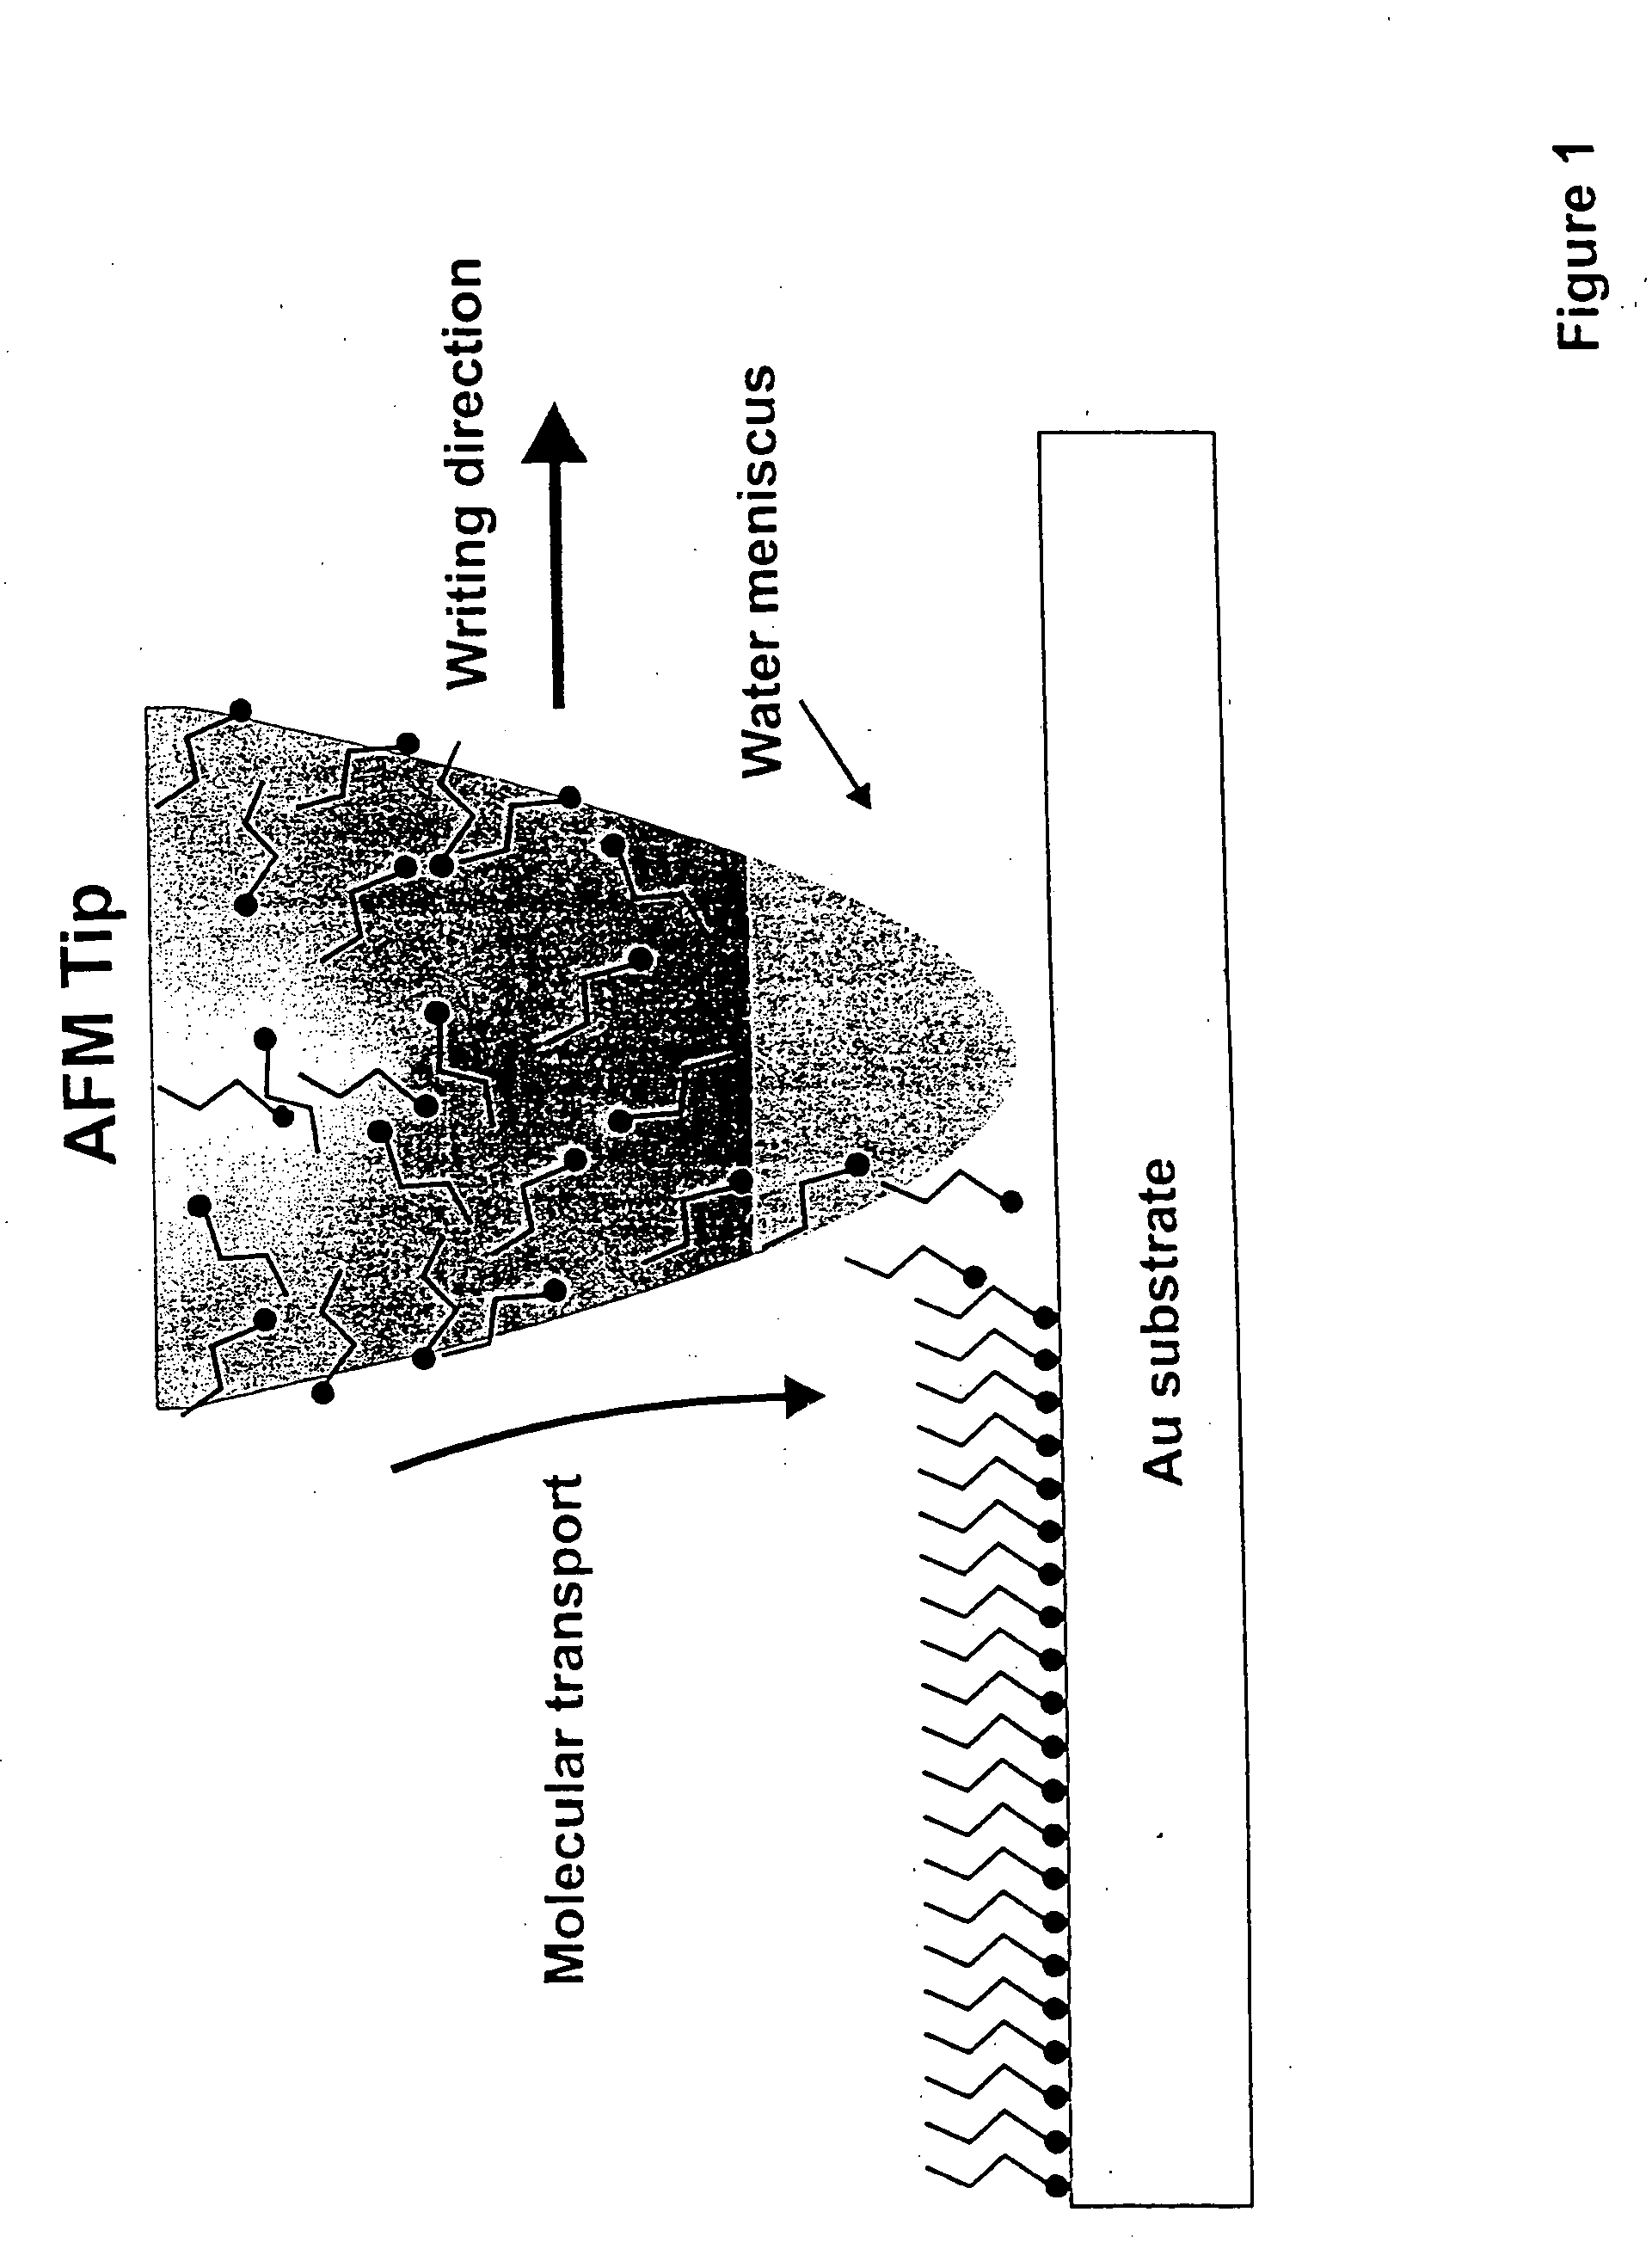 Methods utilizing scanning probe microscope tips and products thereof or produced thereby